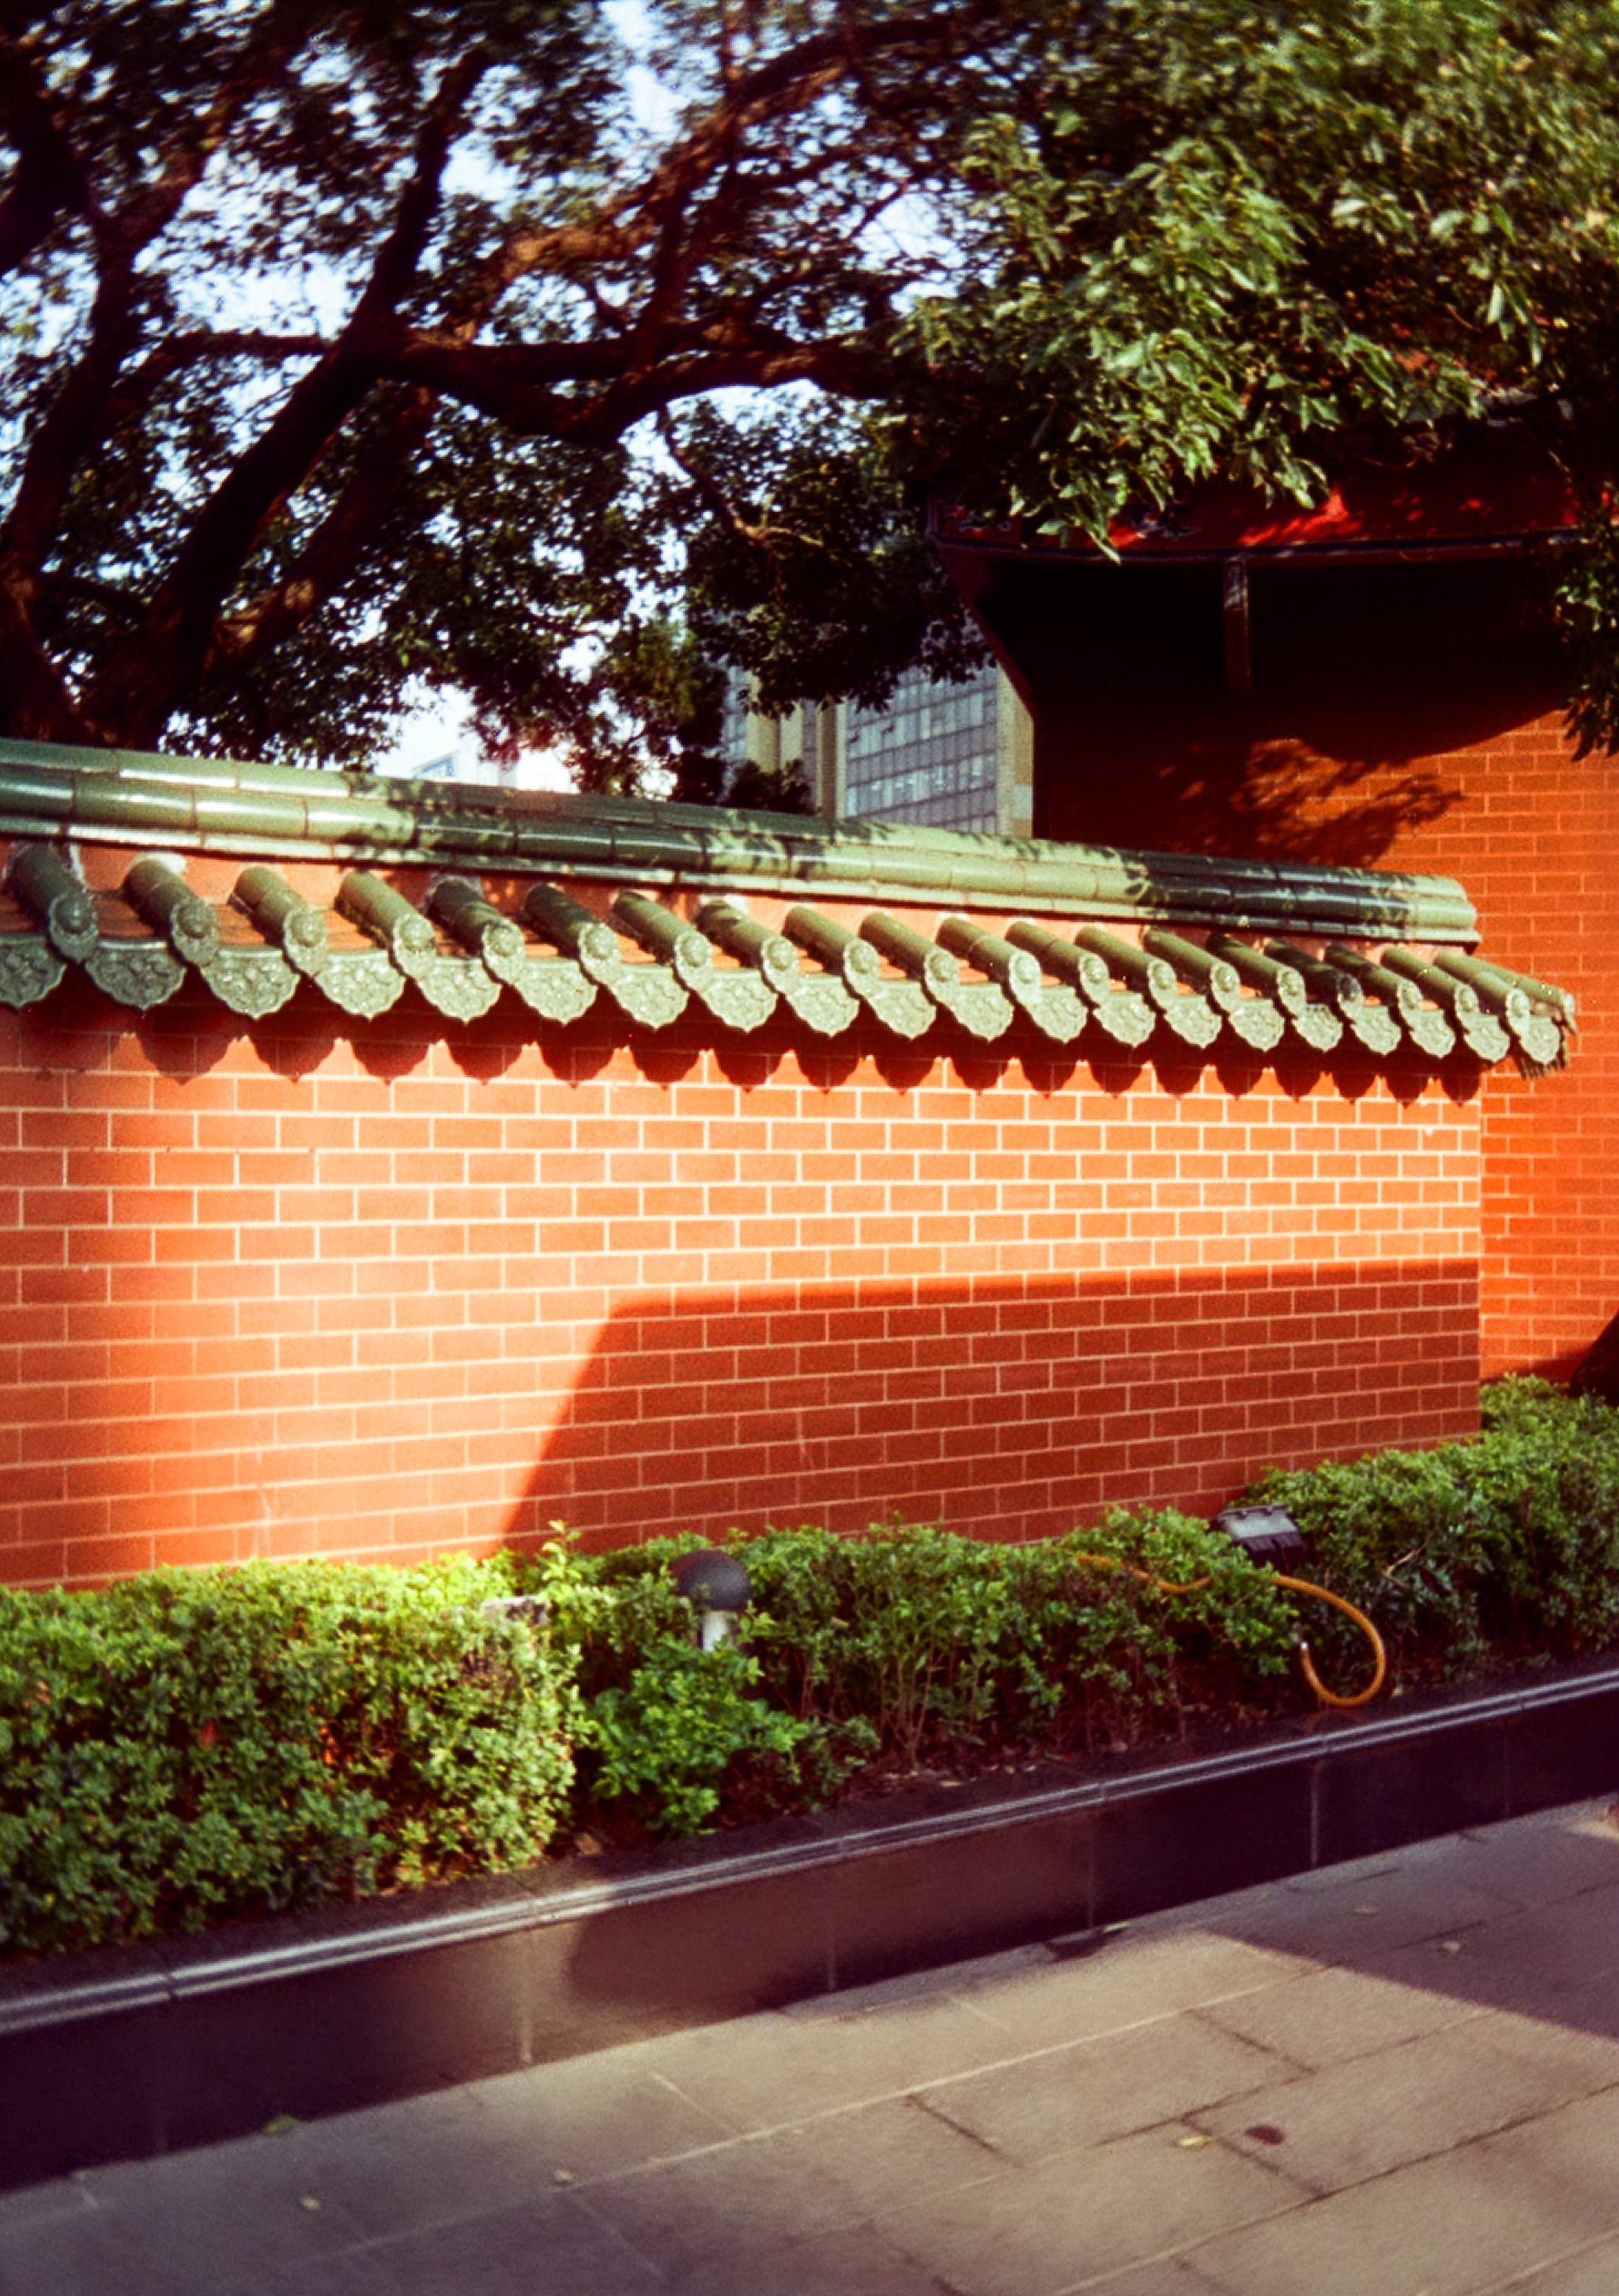 The outside wall of a Chinese style temple.